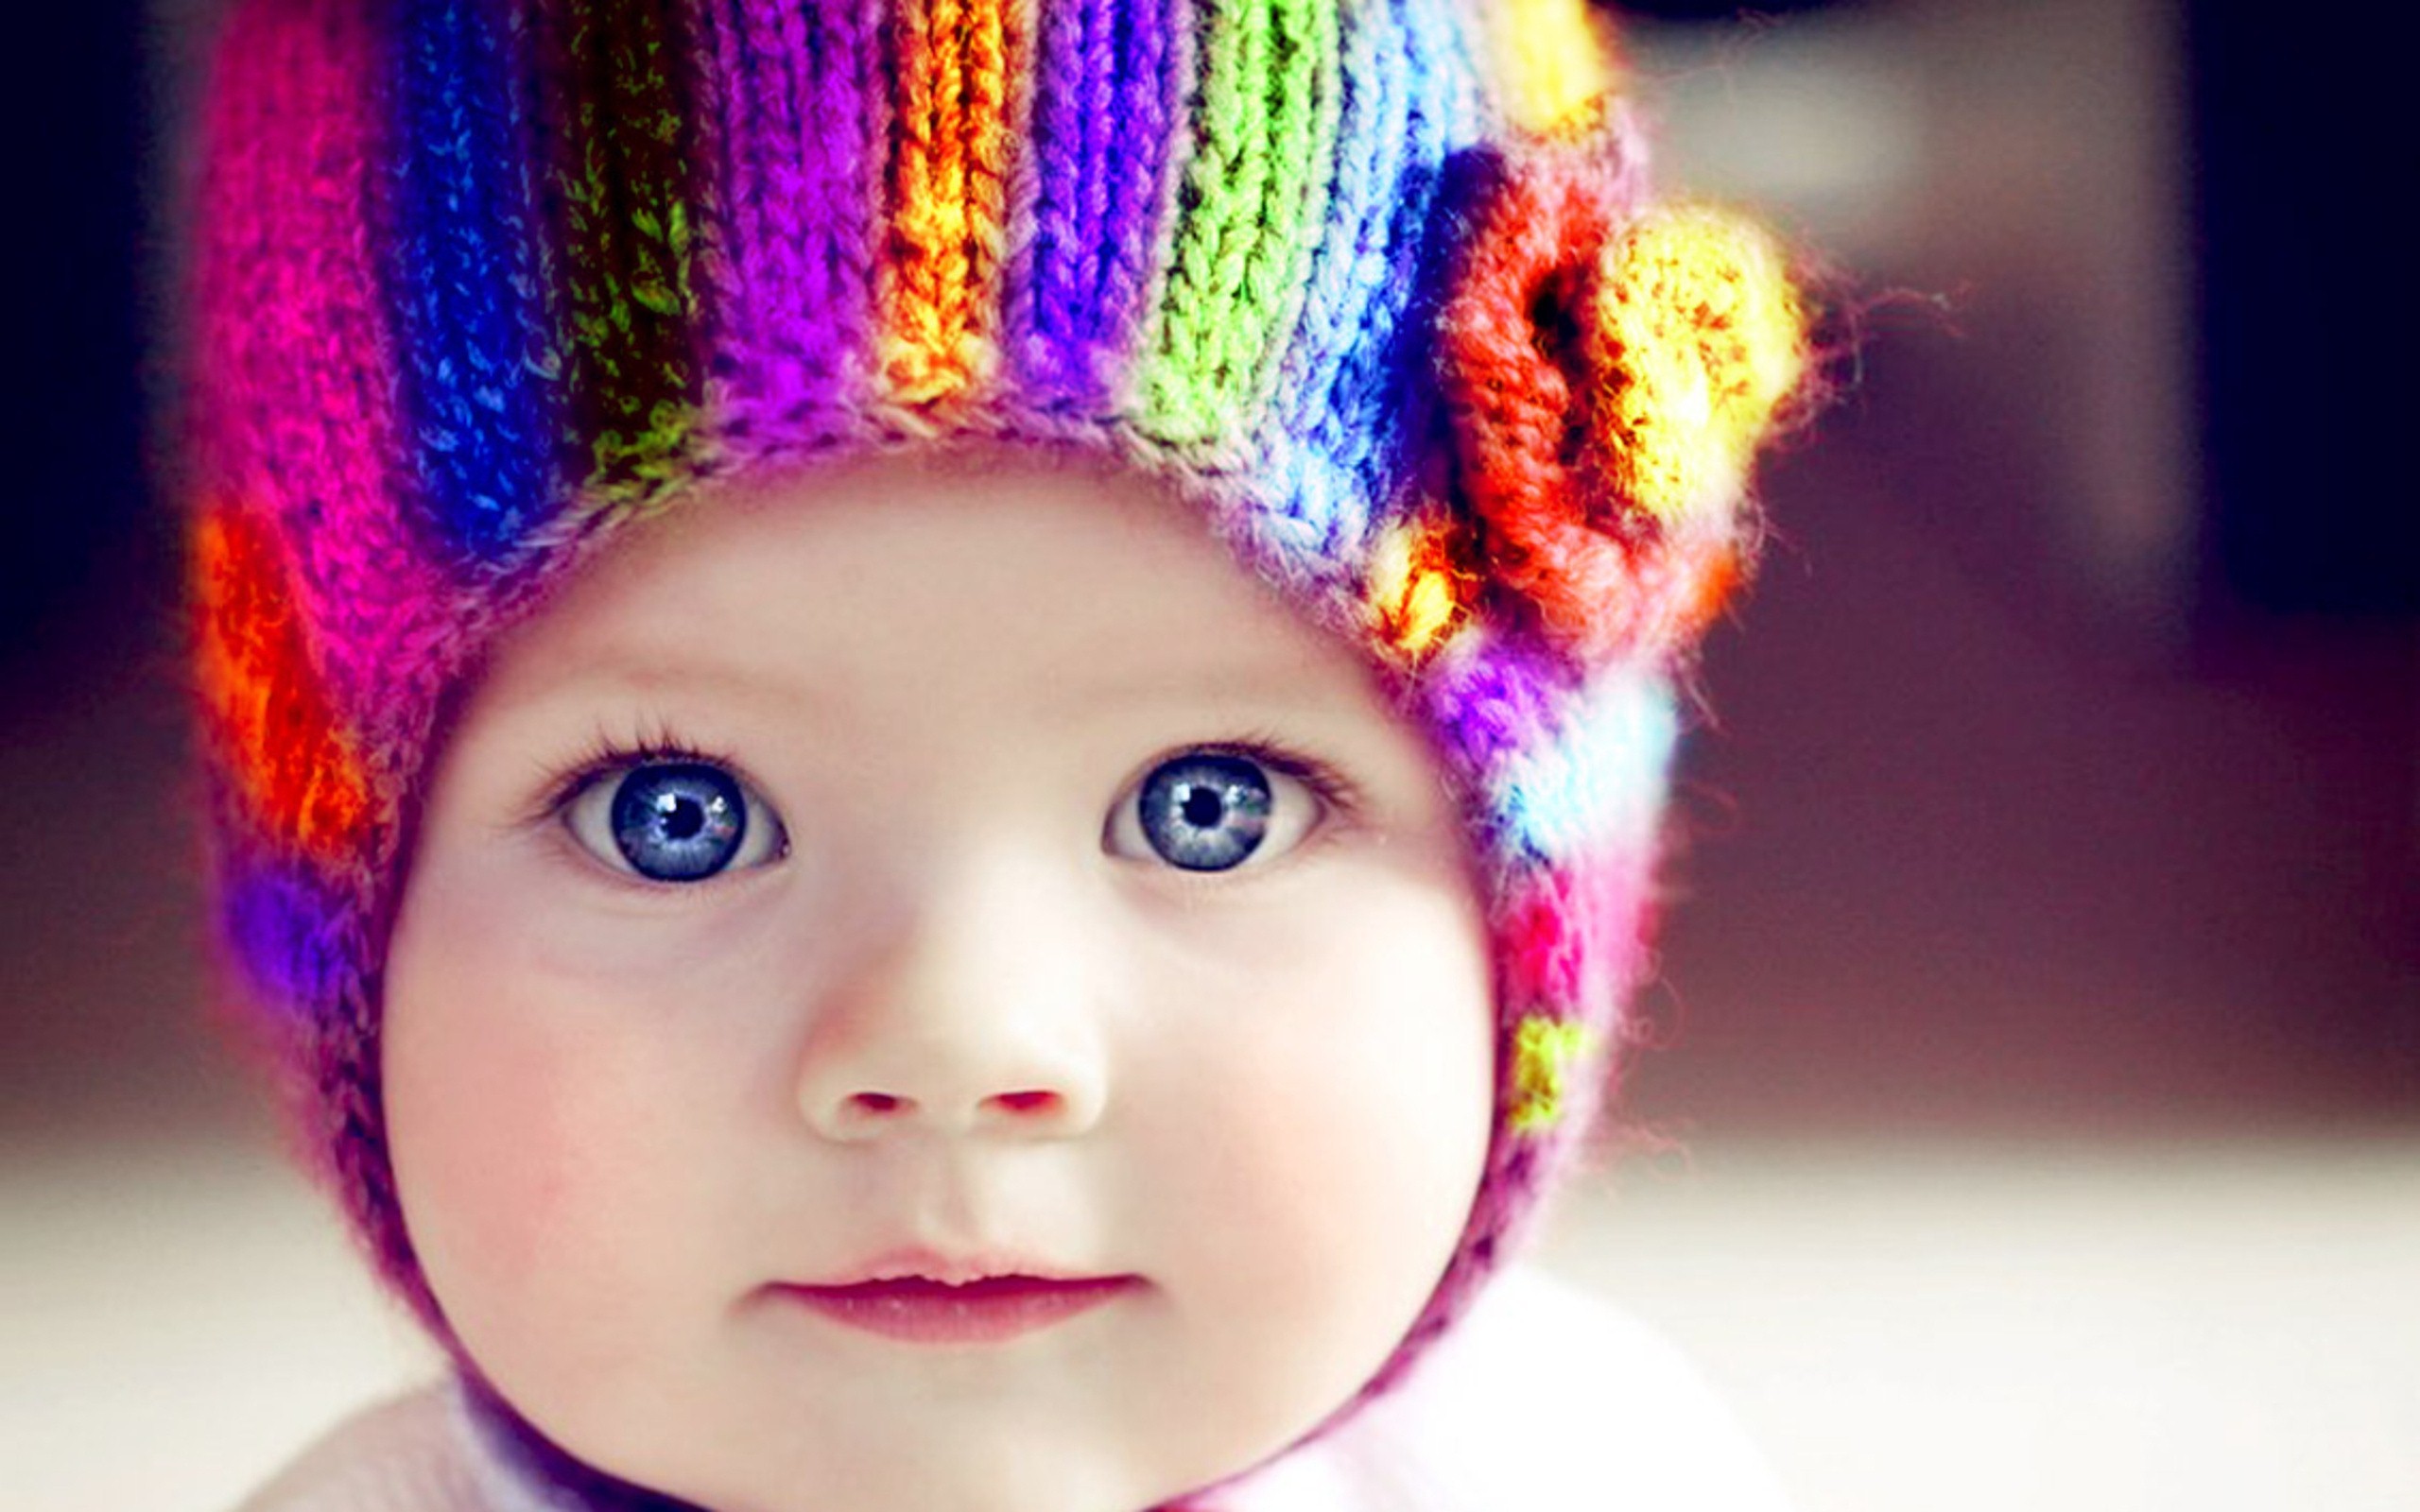 Cute Colorful Baby With Blue Eye Wallpaper HD